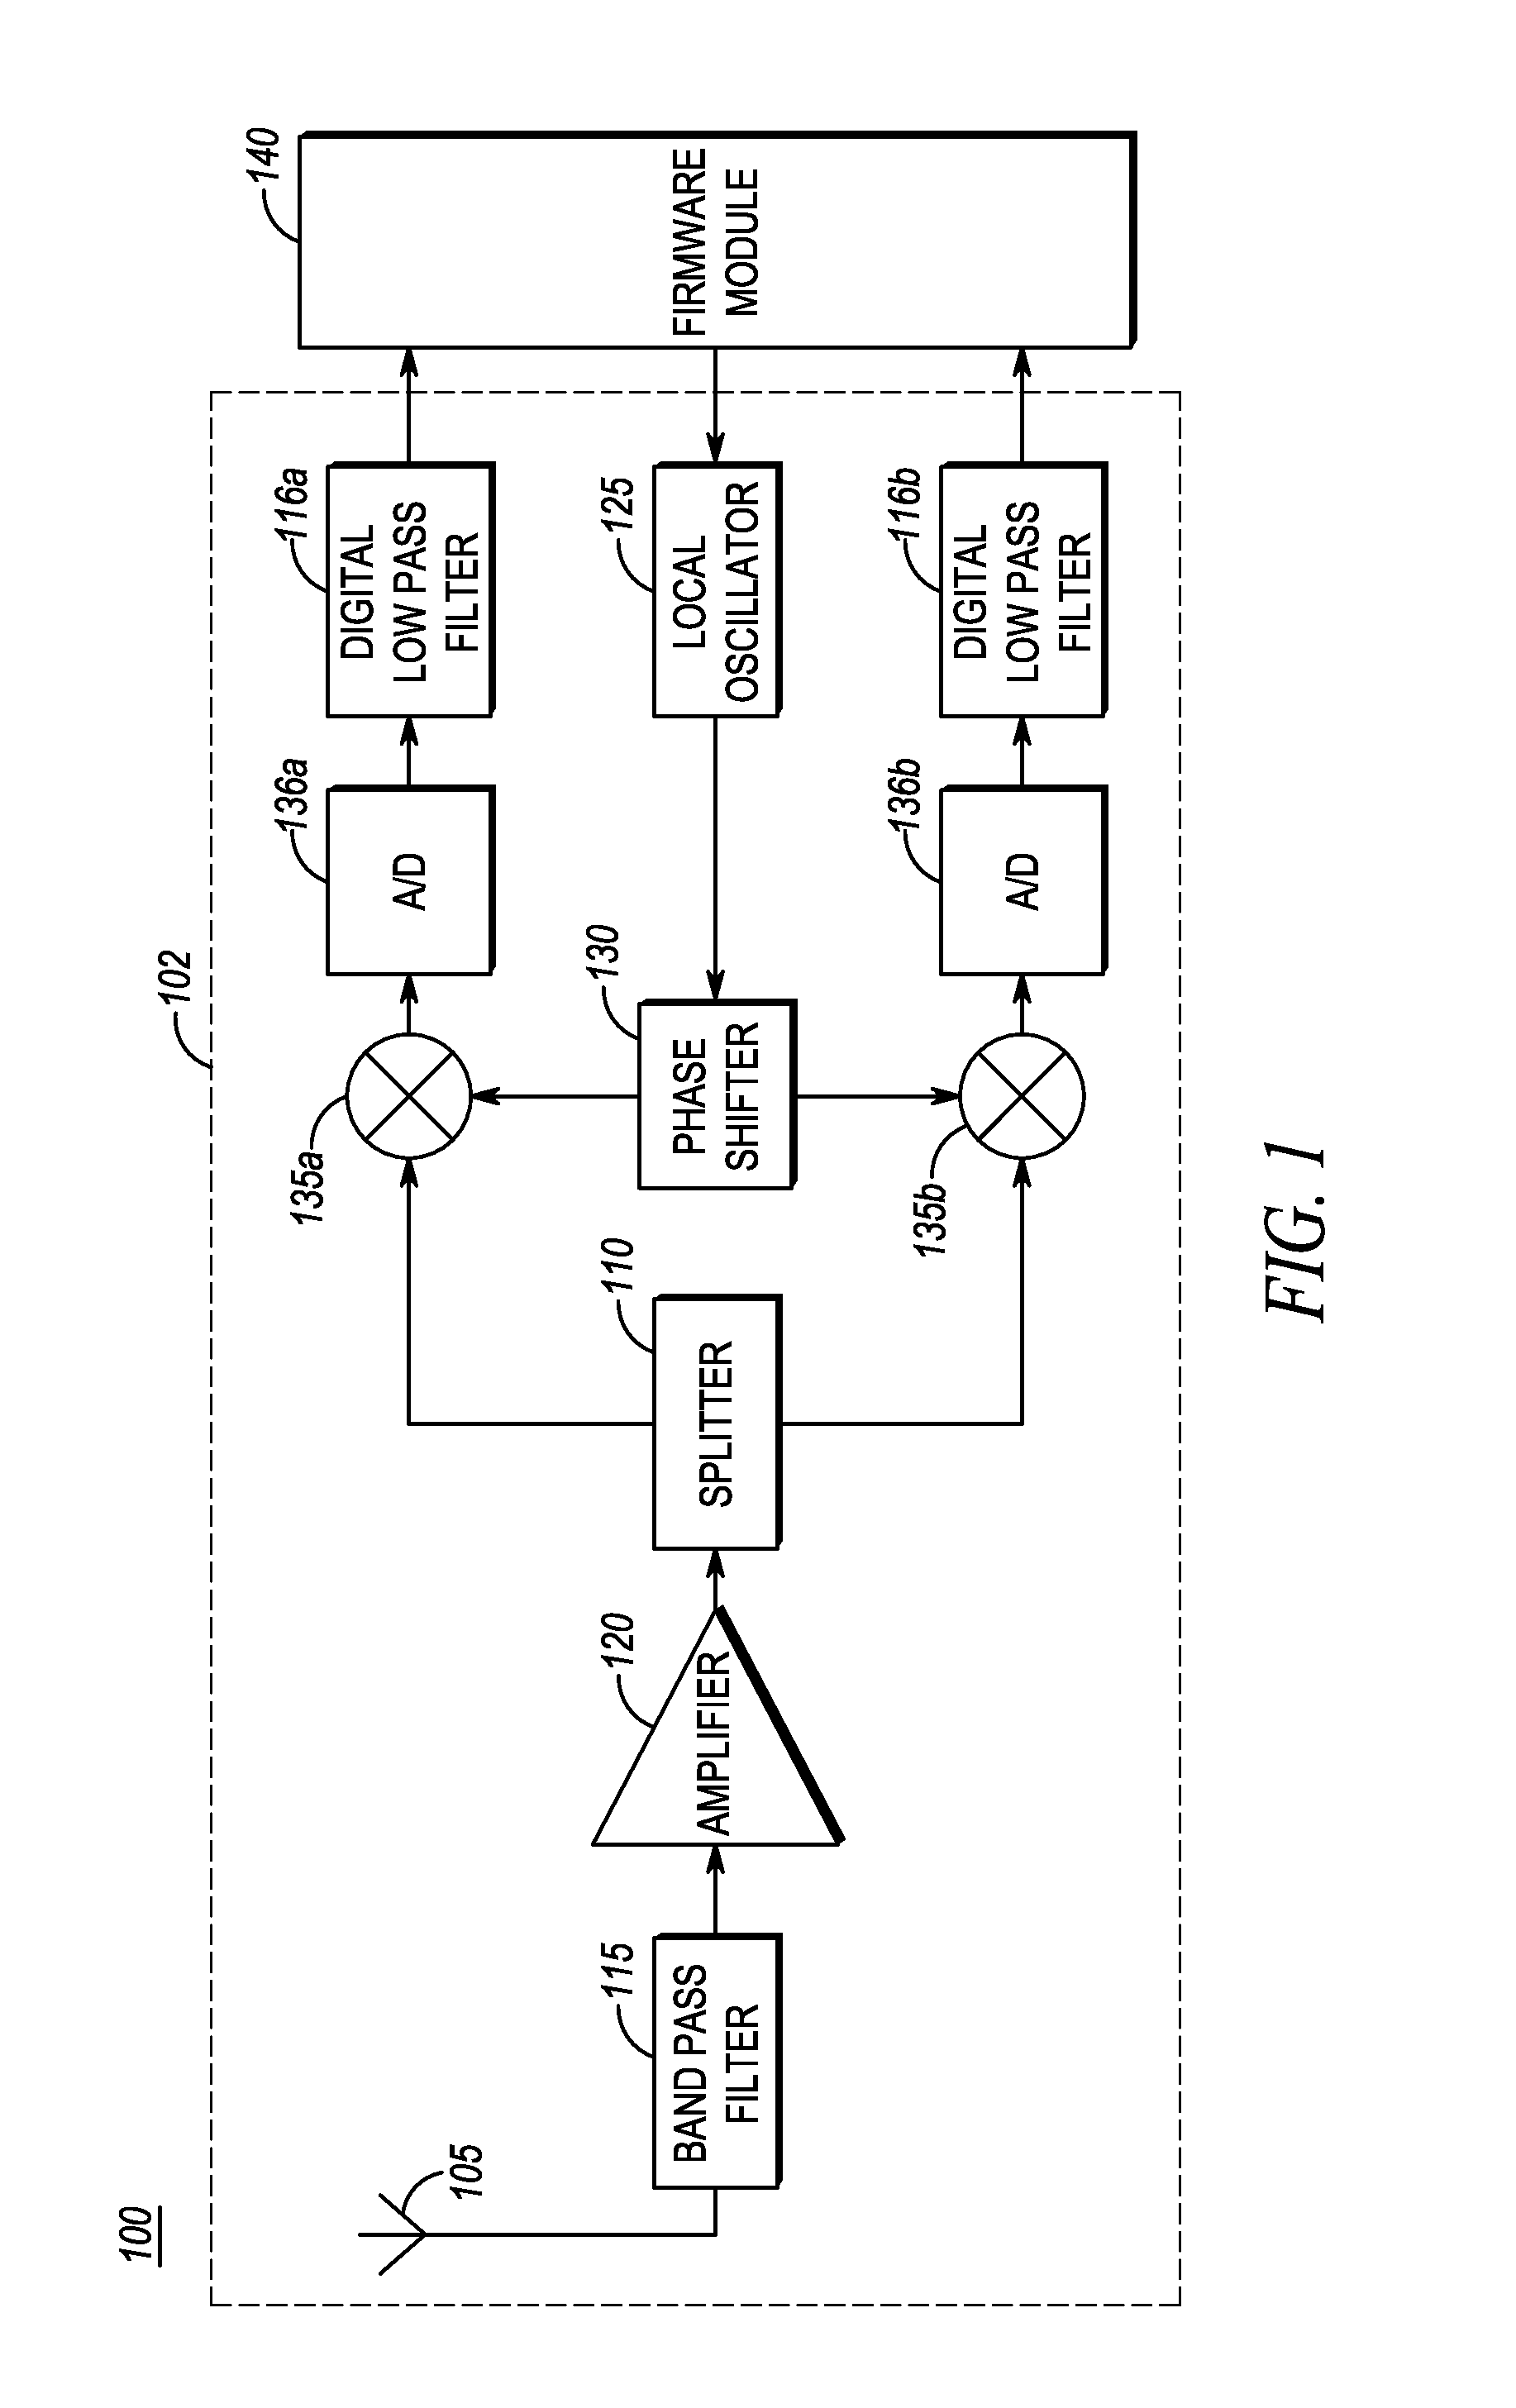 Very low intermediate frequency (VLIF) receiver and a method of controlling a VLIF receiver